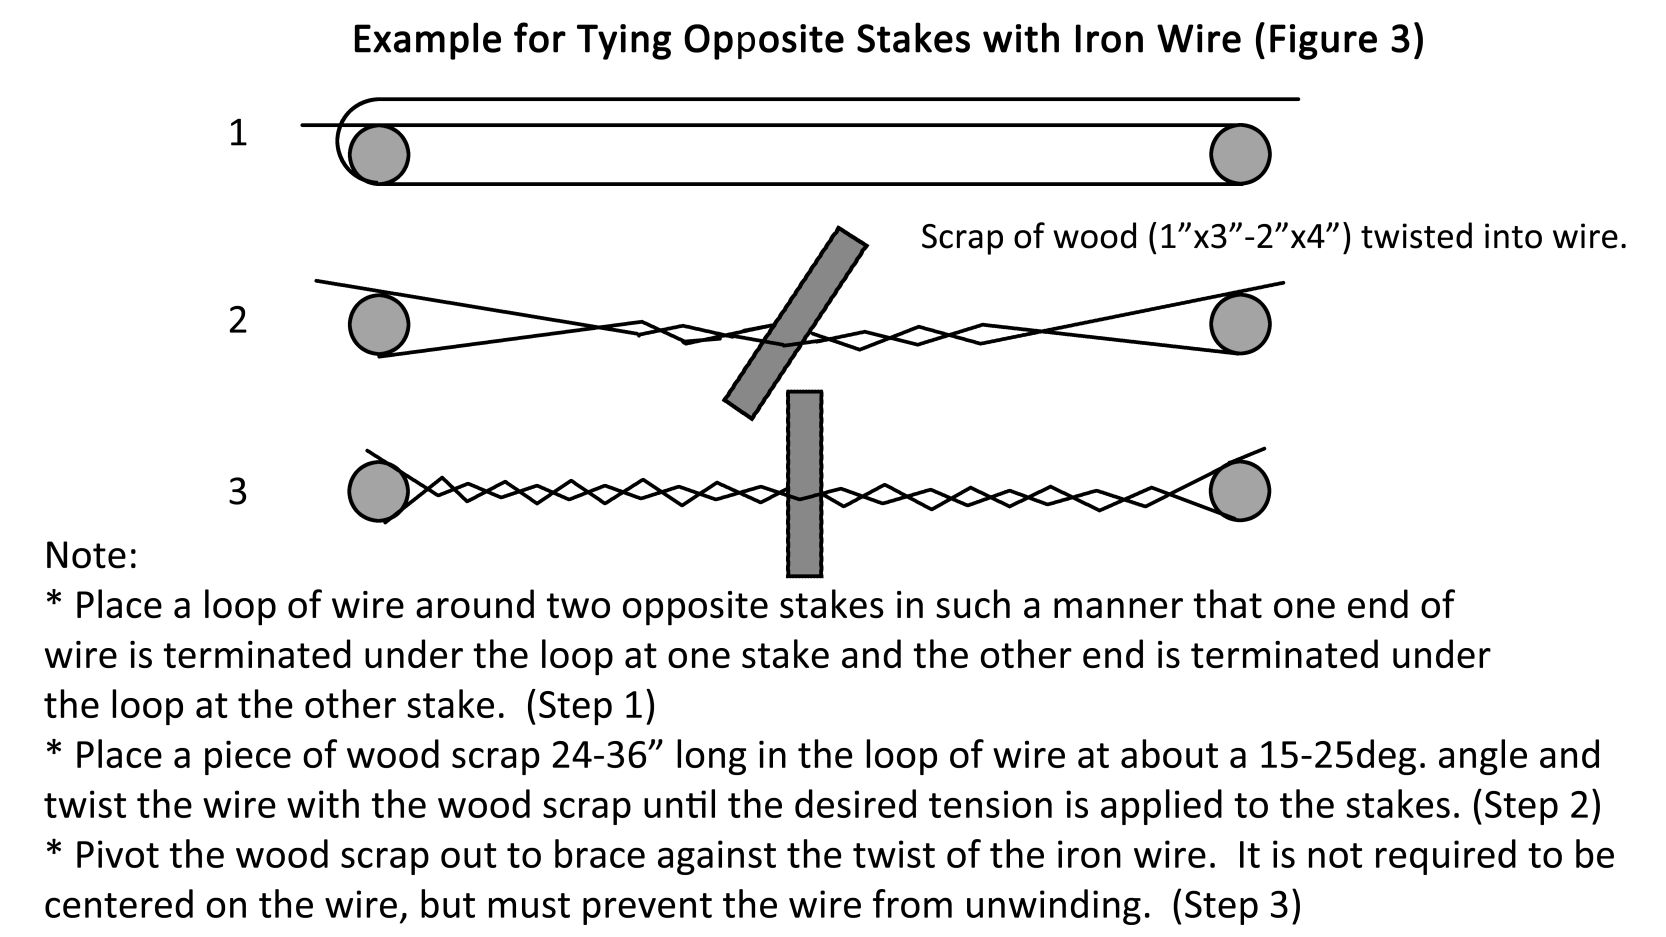 Method for rigging Iron Wire Cross Ties